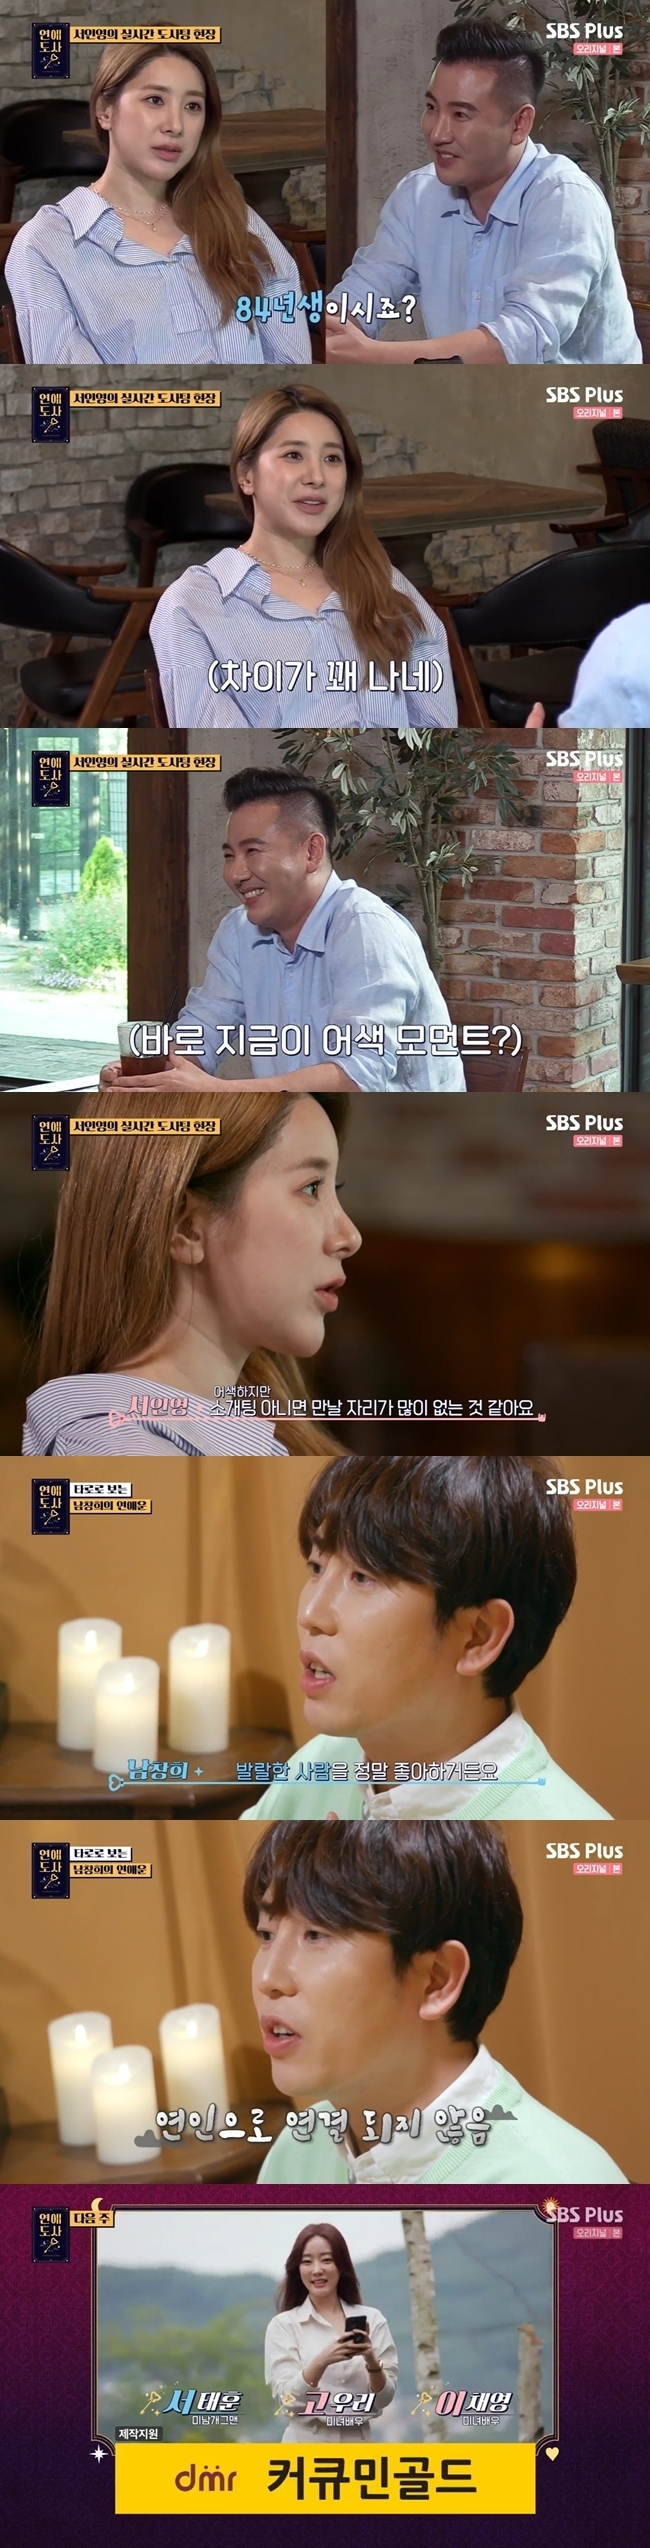 Singer Seo In-young received an after-application after a blind date with five-year-old OrthodonticsPhysician.On June 22, SBS Plus and Channel S entertainment program Love Dosa, Seo In-young overcame blind date depression and challenged the dossat.The comedian Nanchang Hee gave up the blind date in anticipation of a new relationship to meet in August.On this day, the introvert correctly grasped the hardships of Seo In-young: Im trying to crave whats not in the world; Im pursuing love thats not in the world; I dont think theres any place to rely.It is a style that is cut alone, he said.So, Seo In-young said, I have no will. I do not tell hard things. I talk to my brother, but I am sorry.When Im in a hard time, I go into the room, cover the futon and cry for hours. Asked what he would like to do if he did a blind date and did well, he said, I want to take a dog walk.I think it would be good to be able to share a lot of conversation with each other while taking a walk. MC Jin-kyeong Hong, who watched the Seo In-youngs work in the studio, told Seo In-young, I think it would be better to put down the marriage and think slowly.I think it would be better to fill myself first. However, Seo In-young said, I can not help but think about my parents. My brother declared unmarried.Of course, I do not mean to marry because of my parents, but others see grandchildren, and my parents can not do it. Seo In-young responded coolly to the dossating proposal; the blind date opponent was 5-year-old OrthodonicsPhysician Lee Sang-min.Jin-kyeong Hong said, I am running two small Orthodontics, not small Orthodontics.He is a humble man, he added.Asked about his ideal type, Lee Sang-min said, He is a pretty and code-ready person in his eyes. Seo In-young said, I like cute people when they are round and laughing like bears.I like people with a built body. I like people who feel stable. Lee Sang-min asked Seo In-young, If you meet people, are not they upset about the prejudice that they see themselves differently?So, Seo In-young said, I am upset, but now I have surpassed it. It is still uncomfortable to be conscious.It is not a created image, but it is a more over-image. It seems to have to endure because there is something to lose as much as it gets. Seo In-young asked Mr Lee Sang-min if he liked the longest period of love and puppy, and then Mr Lee Sang-min said: I think weve dated for two to three years.I want to raise a puppy or a cat, but I have never raised it. Seo In-young, who currently raises three dogs, advised that he should raise with responsibility while having a somewhat sad look.After finishing the blind date, Lee Sang-min said of Seo In-young, There was a brilliant image, but it was pure.If you give a score to your first meeting today, I think you can give 9 out of 10 points. It was good to see you laughing and talking. Seo In-young, who told me about it in the studio, also said, I want to meet you again.But can not one of you go on an after date with me? He laughed again with a blind date.MCs calmed down Seo In-young, saying, Once you exchange your phone number and meet separately, we are not involved in the decision of two people at all.Nanchang Hee also heard Sajupuli; Nanchang Hee, who met with the astrological master, was rated as having strong self-esteem.I have a strong lion, but I have never seen a lion so gentle. I will meet a woman who will change her thoughts 180 degrees.We may suddenly announce our marriage next year.It was hard to separate work and love, said Nanchang Hee. When I had a meeting with a woman friend, I canceled my appointment and went to work.These have been the cause of frequent quarrels. My favorite style is a youthful person. But it doesnt connect to a lover.When I saw a person who developed into a lover, they were calm and mature people. Seo In-young went on blind date while Nanchang Hee refused: Im not going to do it this time because Im burdened with doing blind date.I will meet a natural relationship in a meeting arranged by Jo Se-ho in August, and no one is currently meeting. At the end of the broadcast, comedian Seo Tae-hoon actor Go Woo-ri Lee Chae-young was announced.In a slightly public trailer, Go Woo-ri raised his curiosity by saying that widow card, Lee Chae-young, husbands seat is empty.